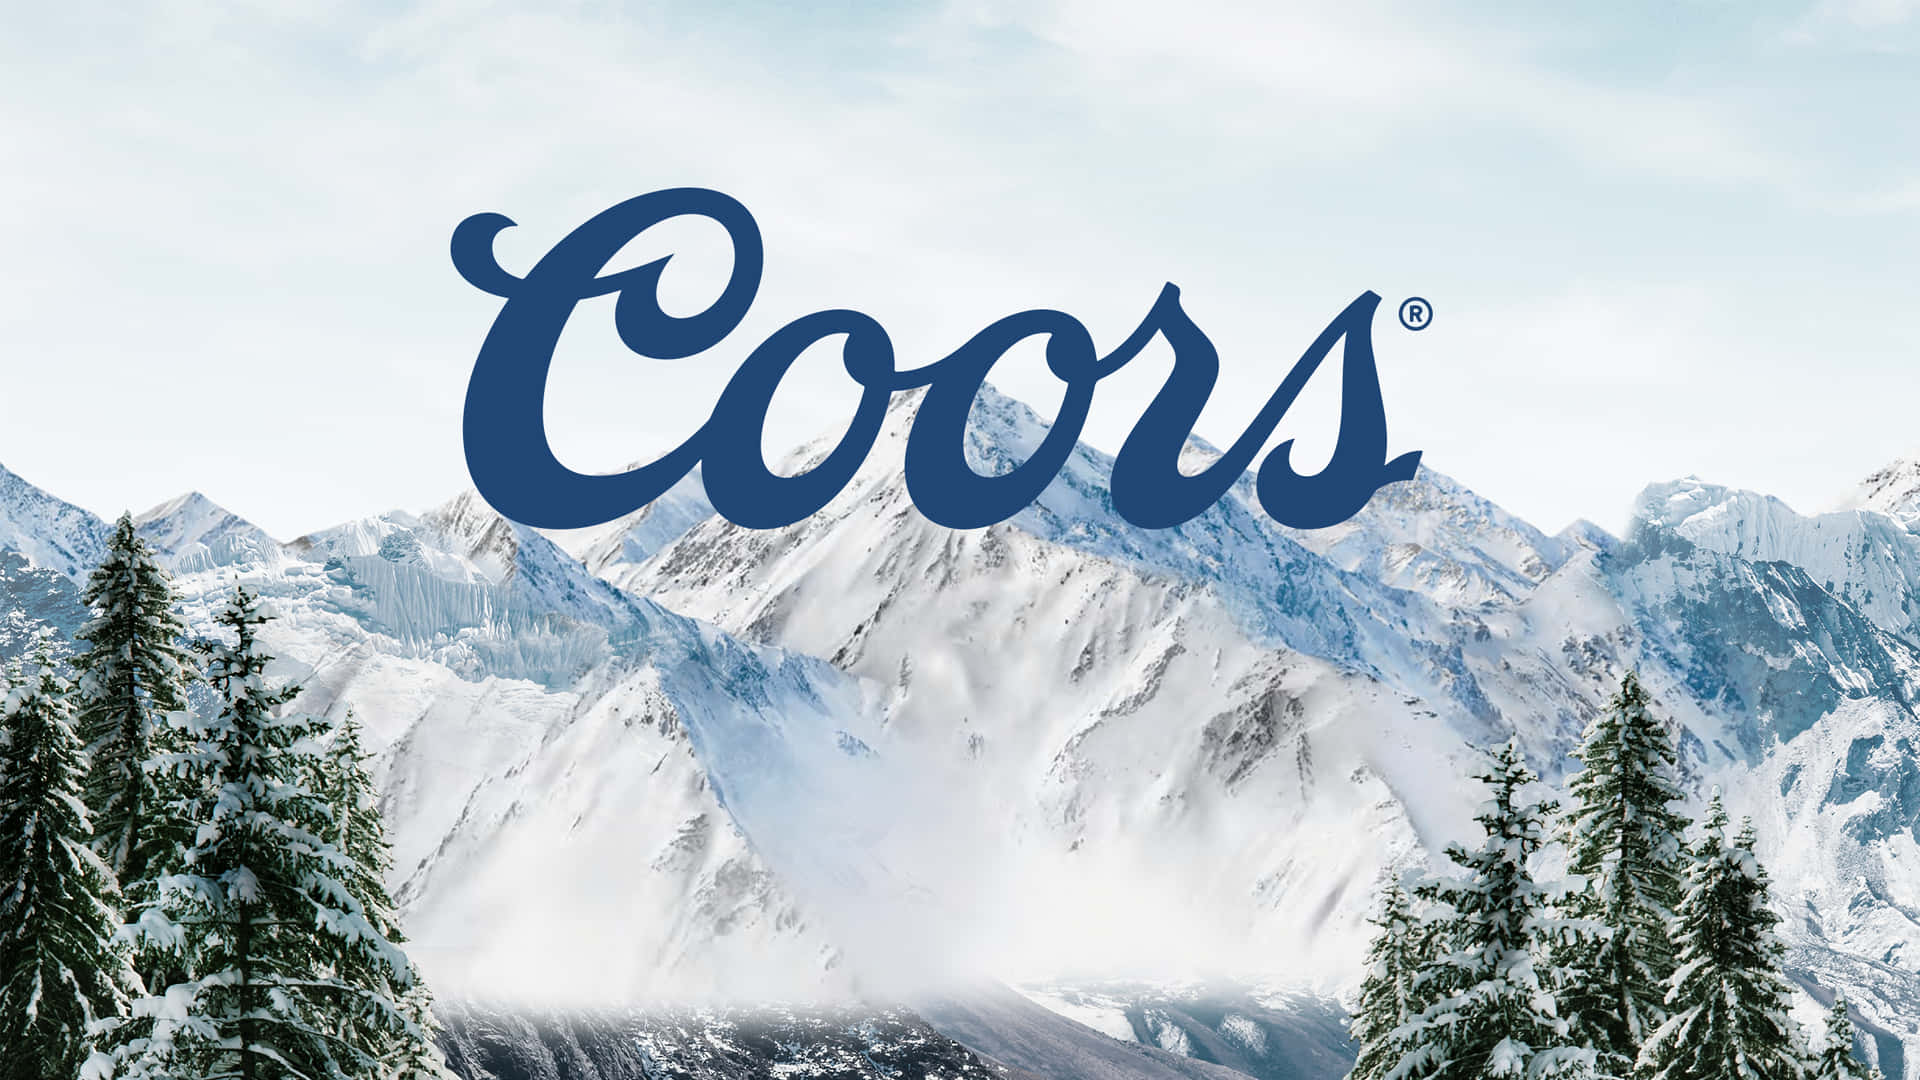 Experience the Most Refreshing Beer: Coors Light Wallpaper